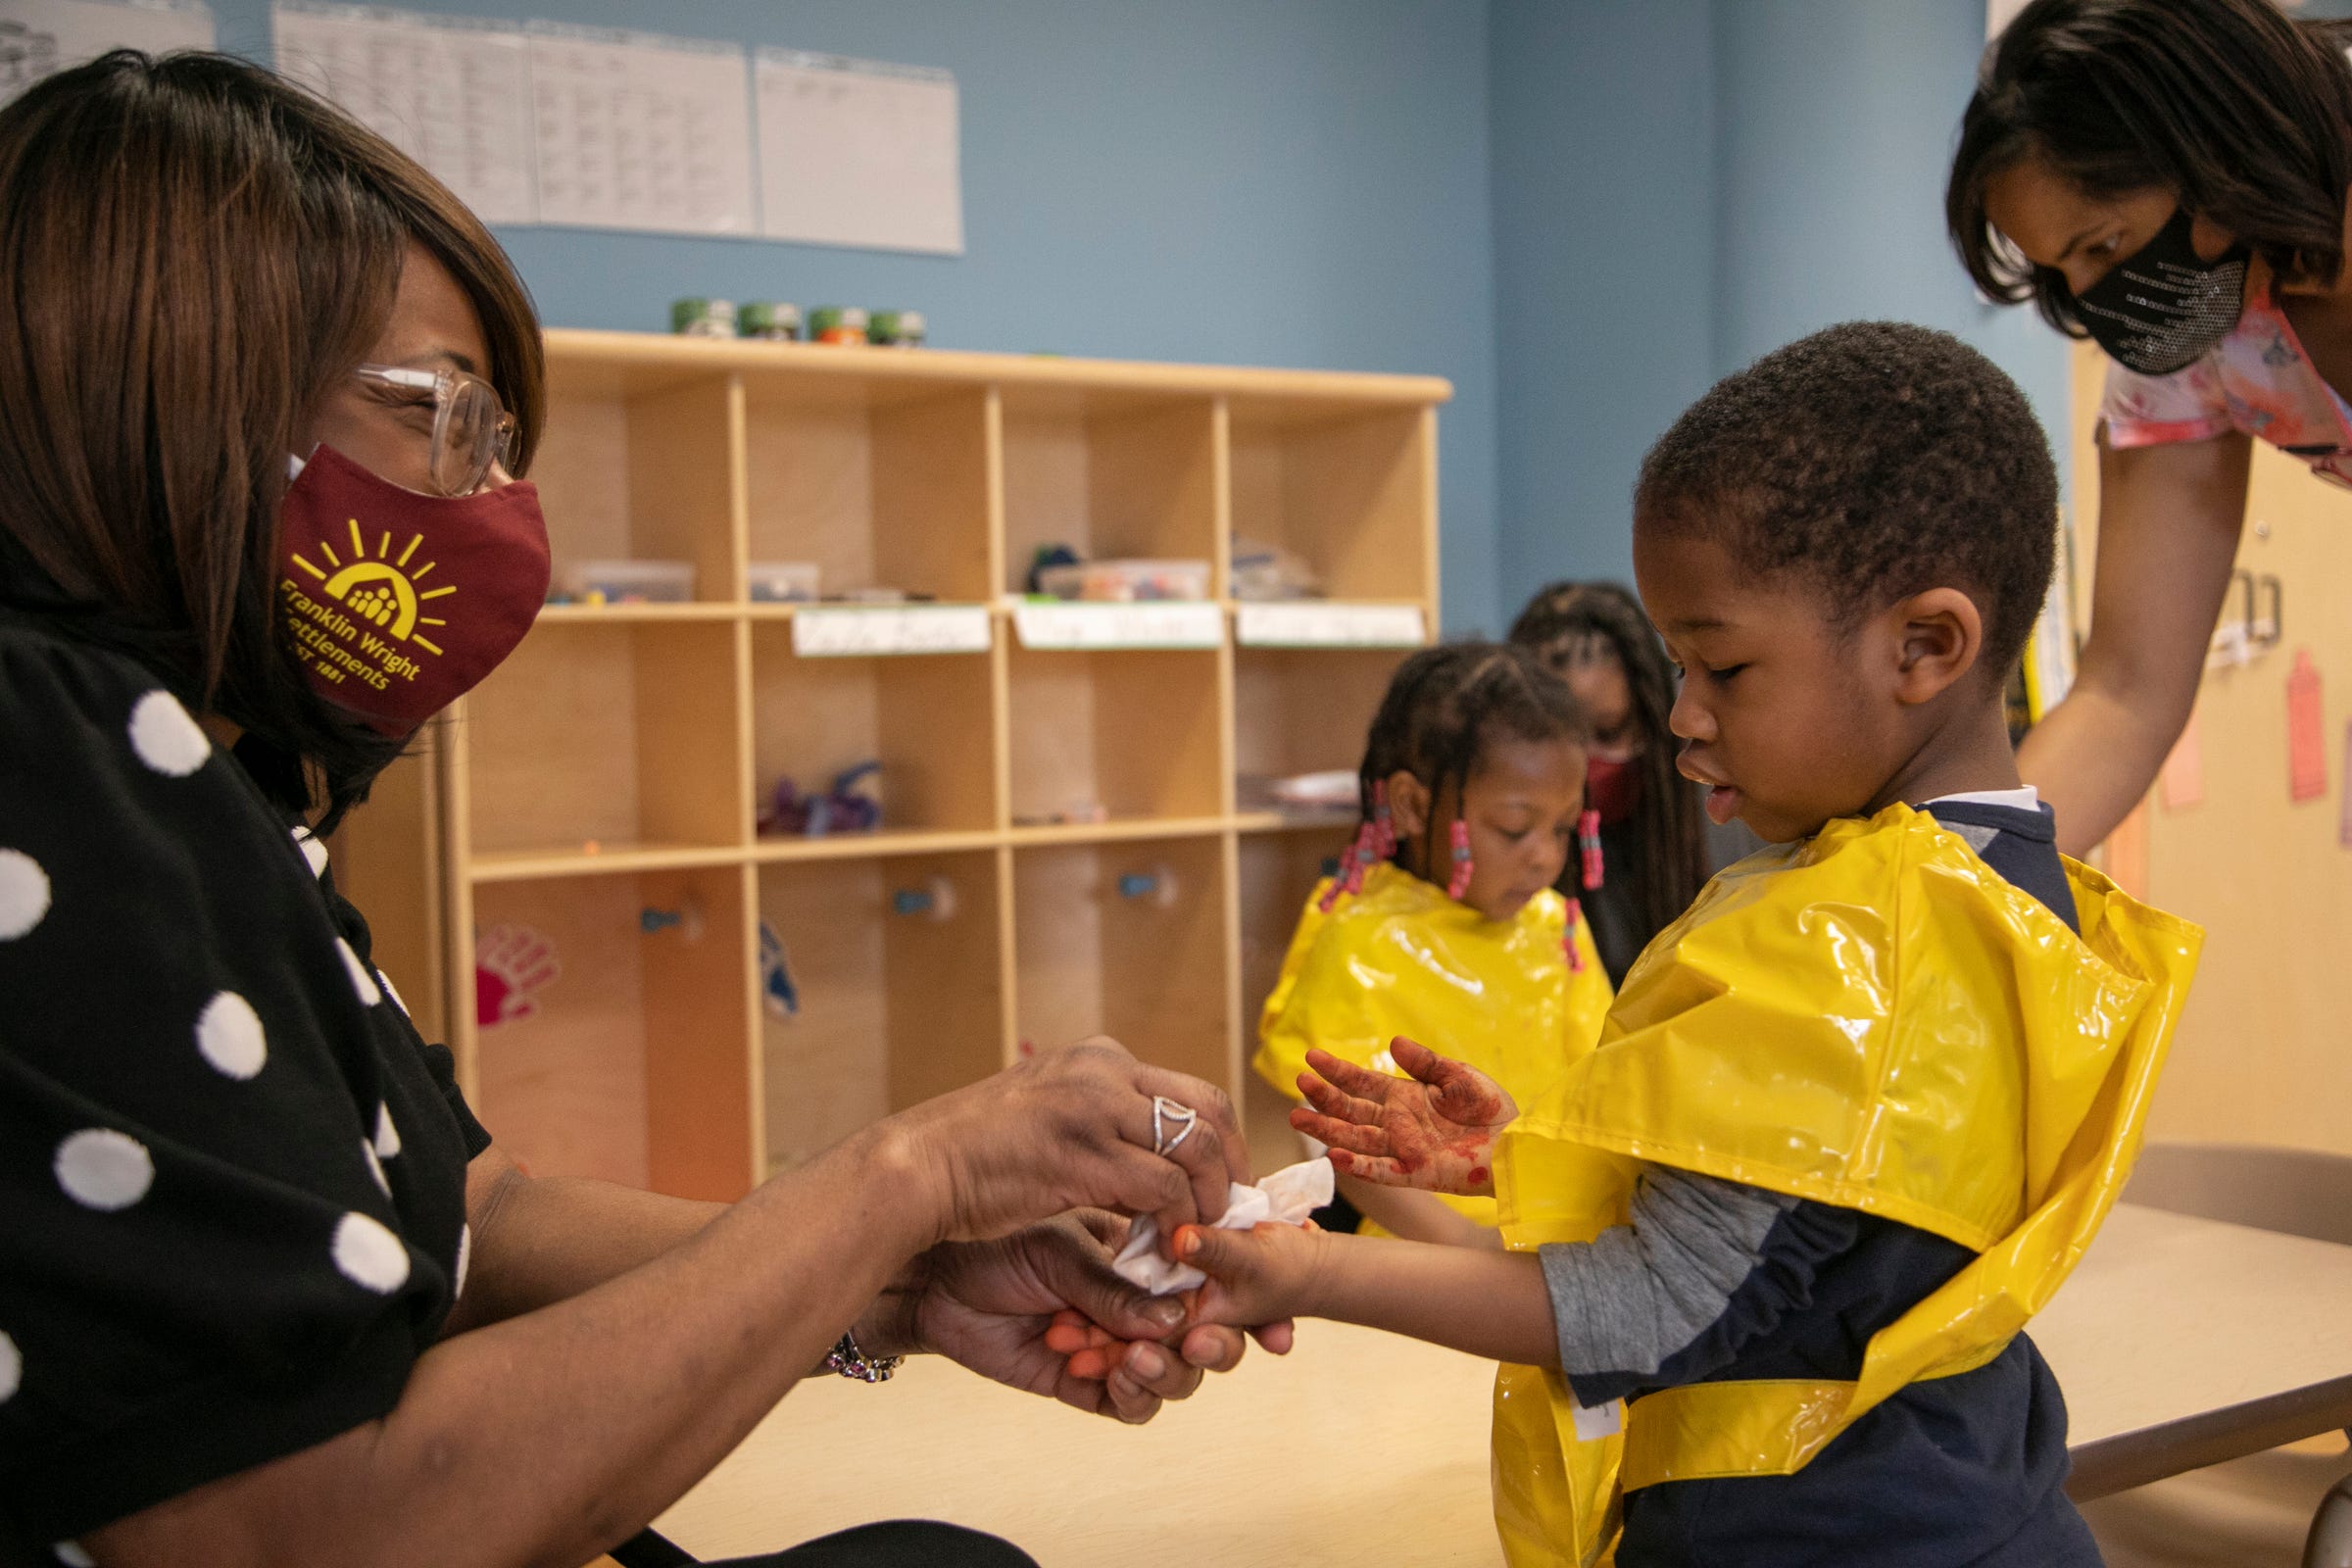 Monique Marks, President and CEO of Franklin Wright Settlements, left, helps clean the hands of Zion Taylor, 2, in his classroom on Mar. 11, 2021. The center turns 140 this year. The organization is all about helping Detroiters with basic life, social and family needs.